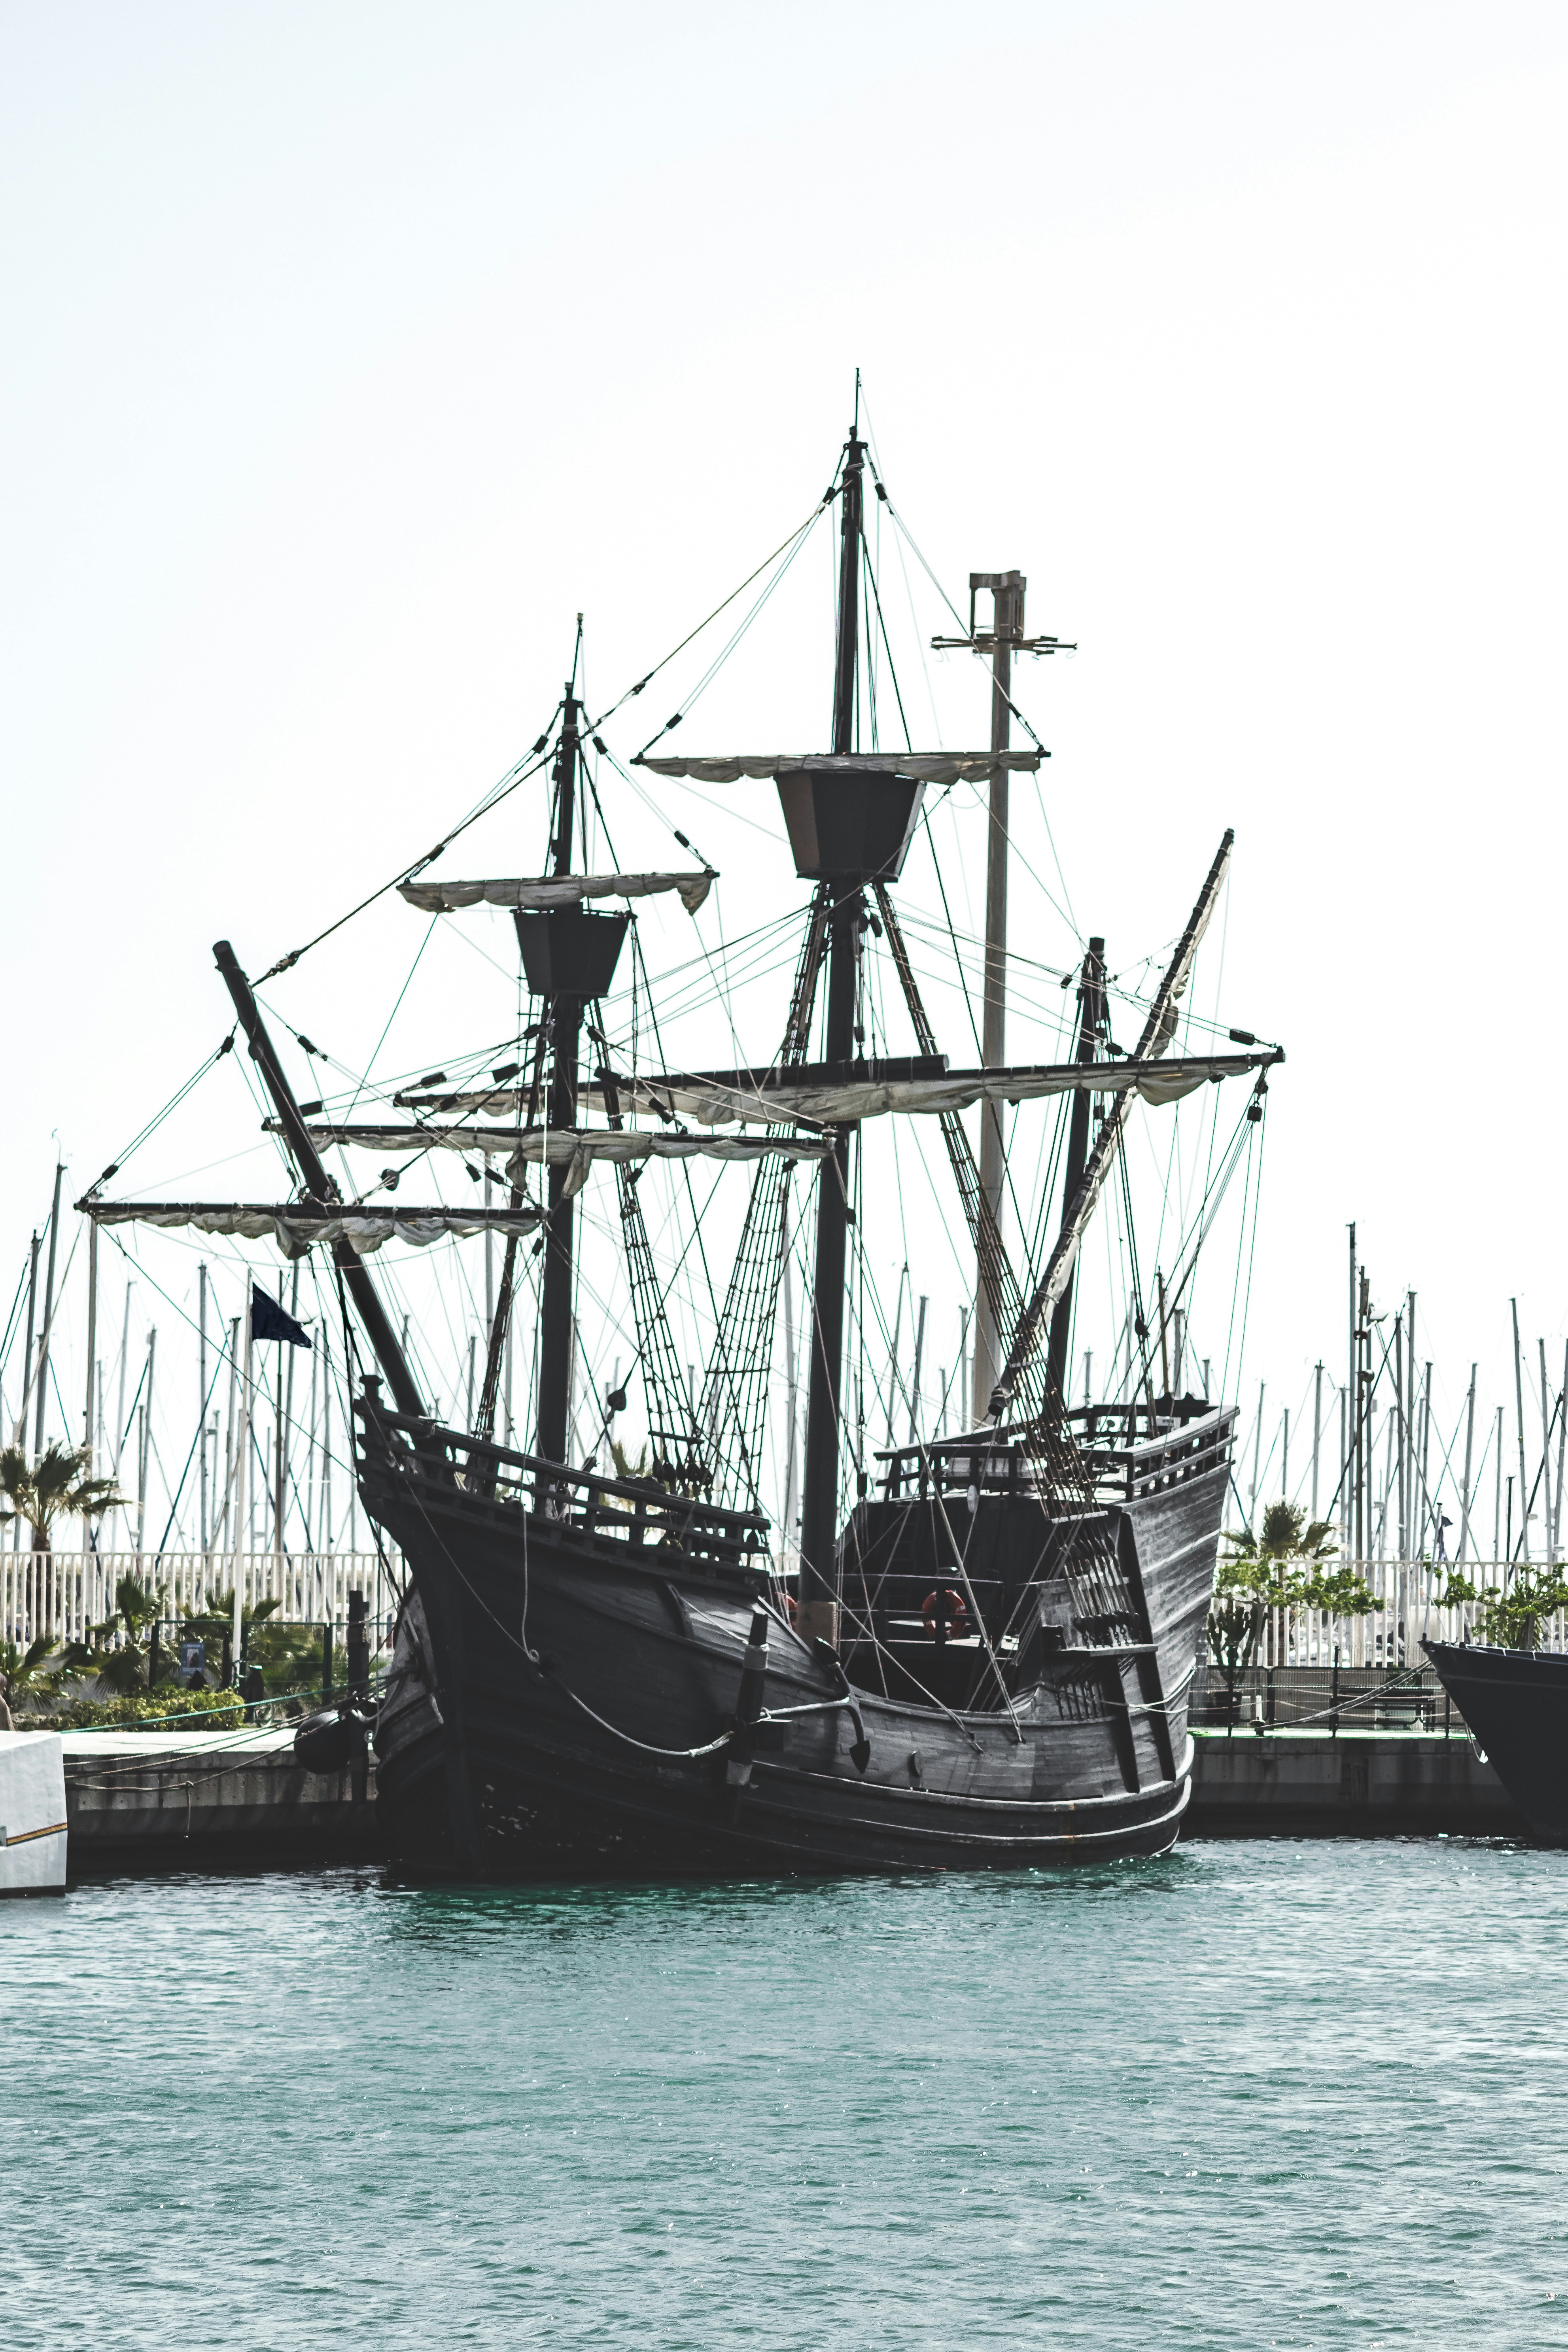 black and white sail ship on dock during daytime